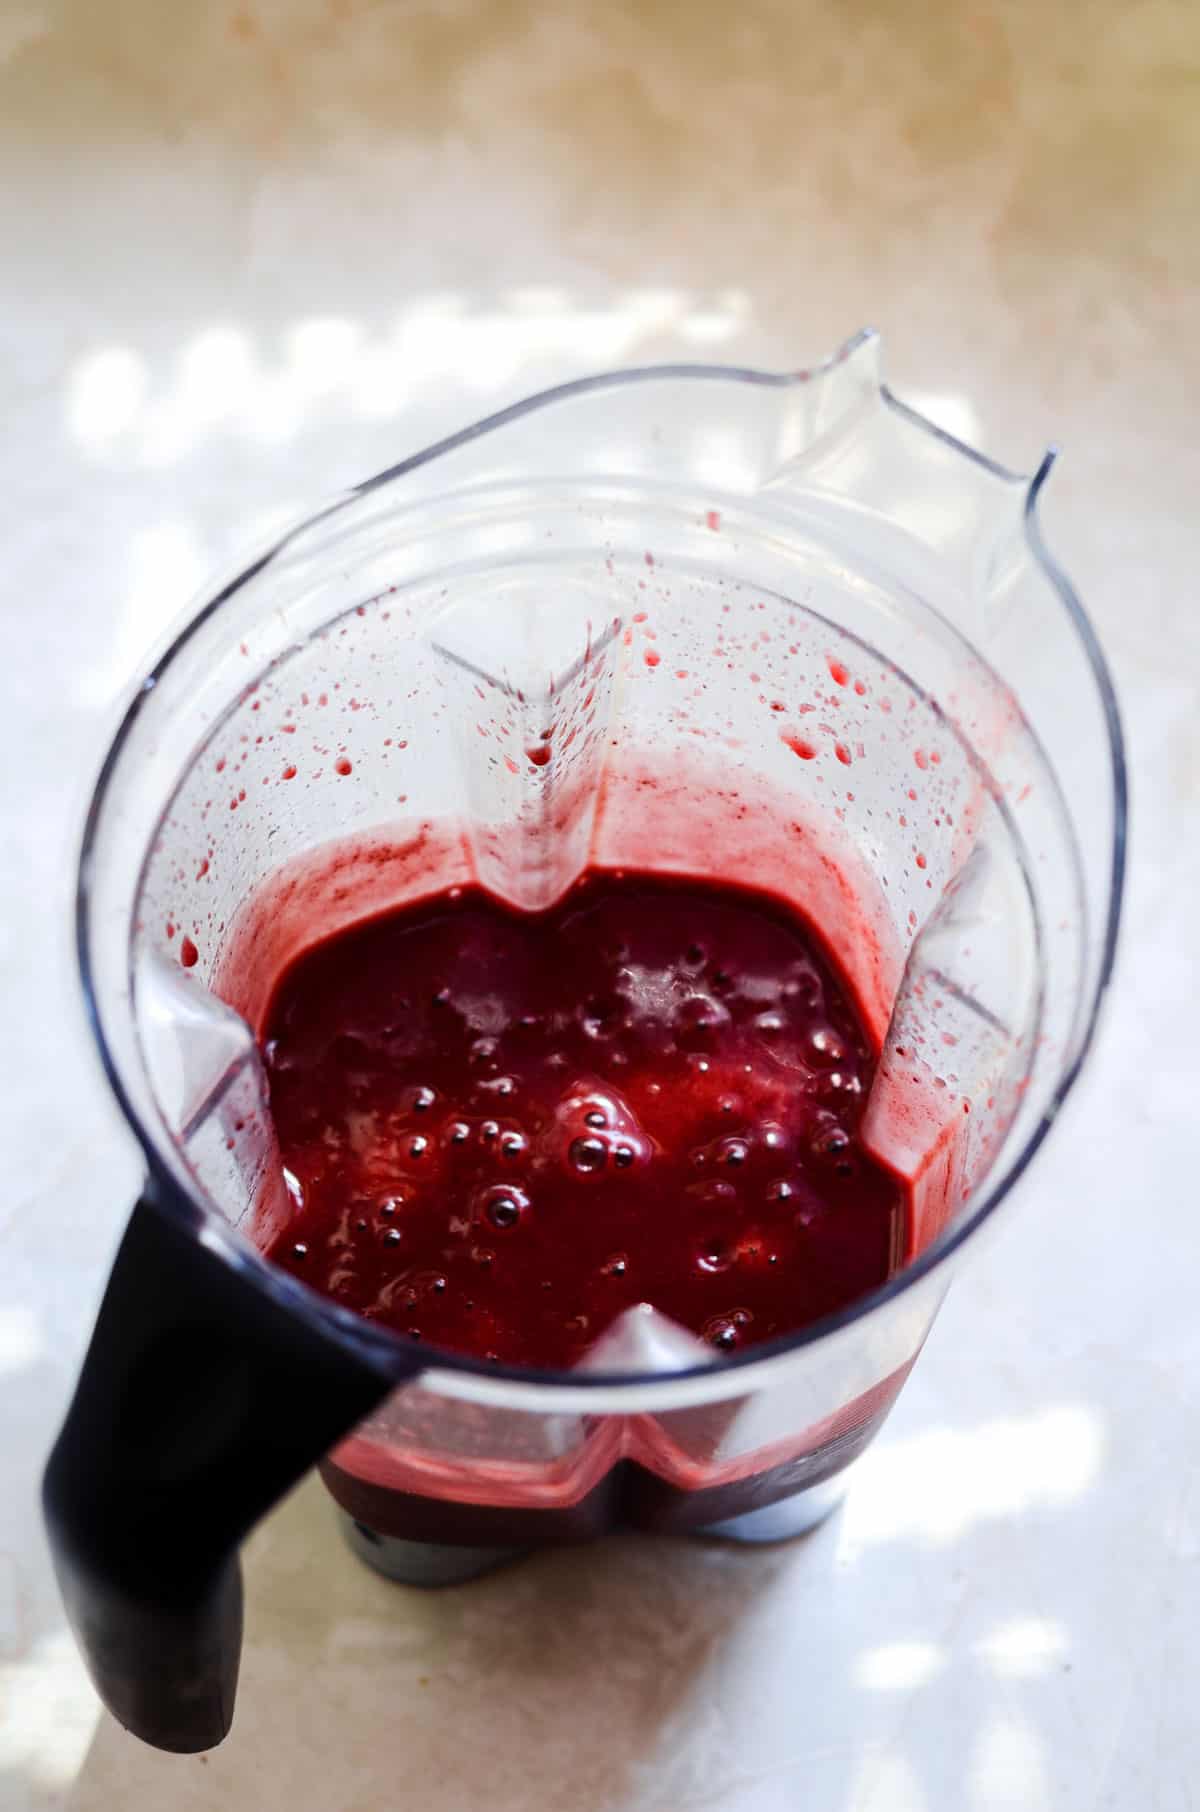 Dark red cherry liquid in a blender container for healthy popsicles.